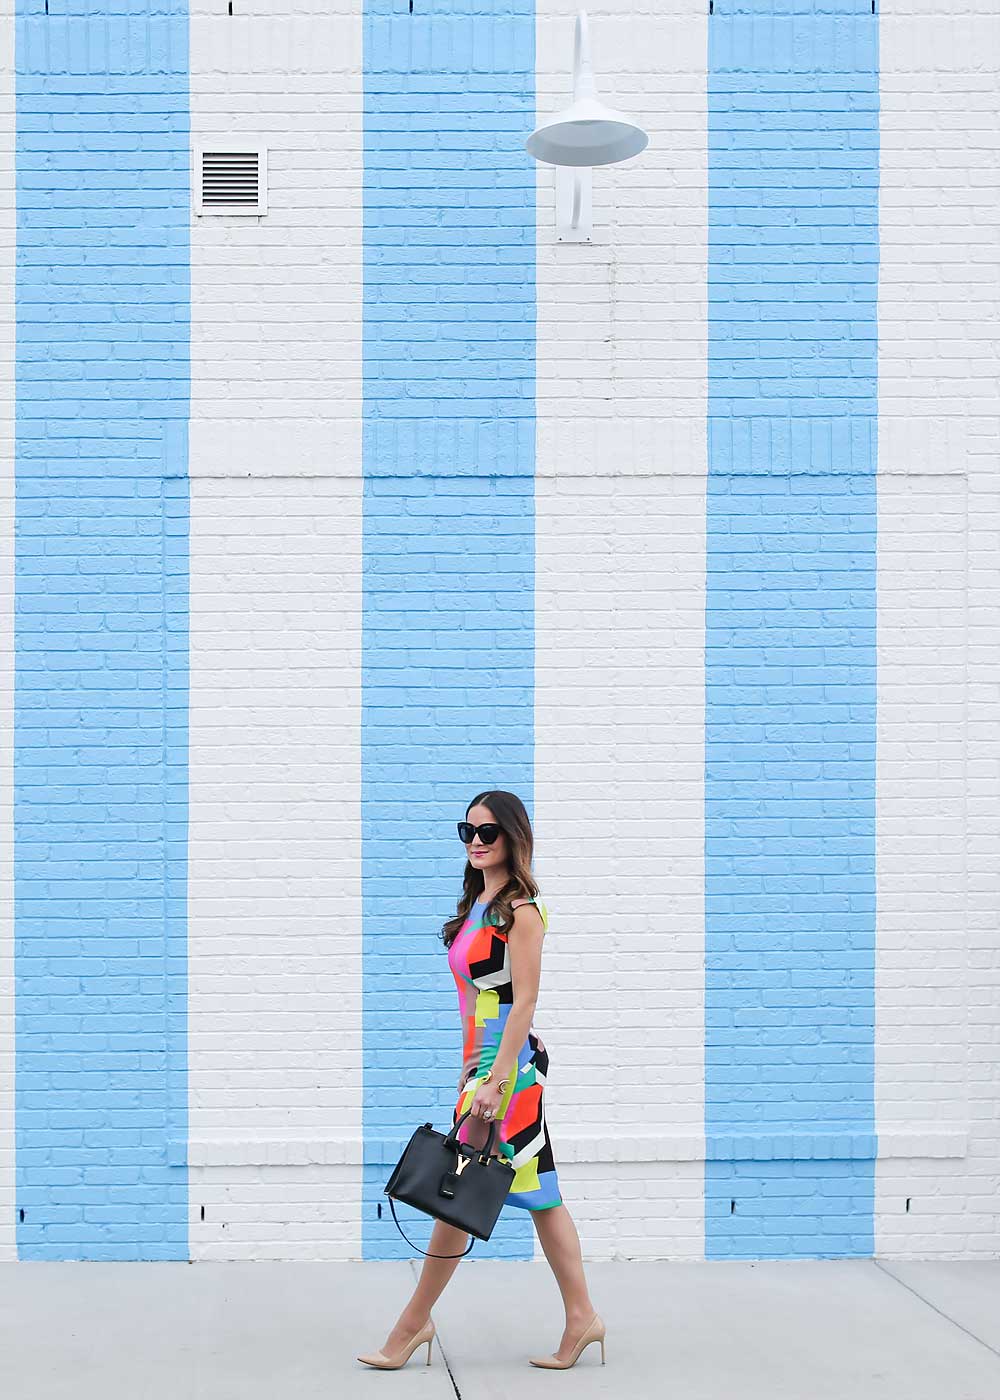 Nashville Colored Wall